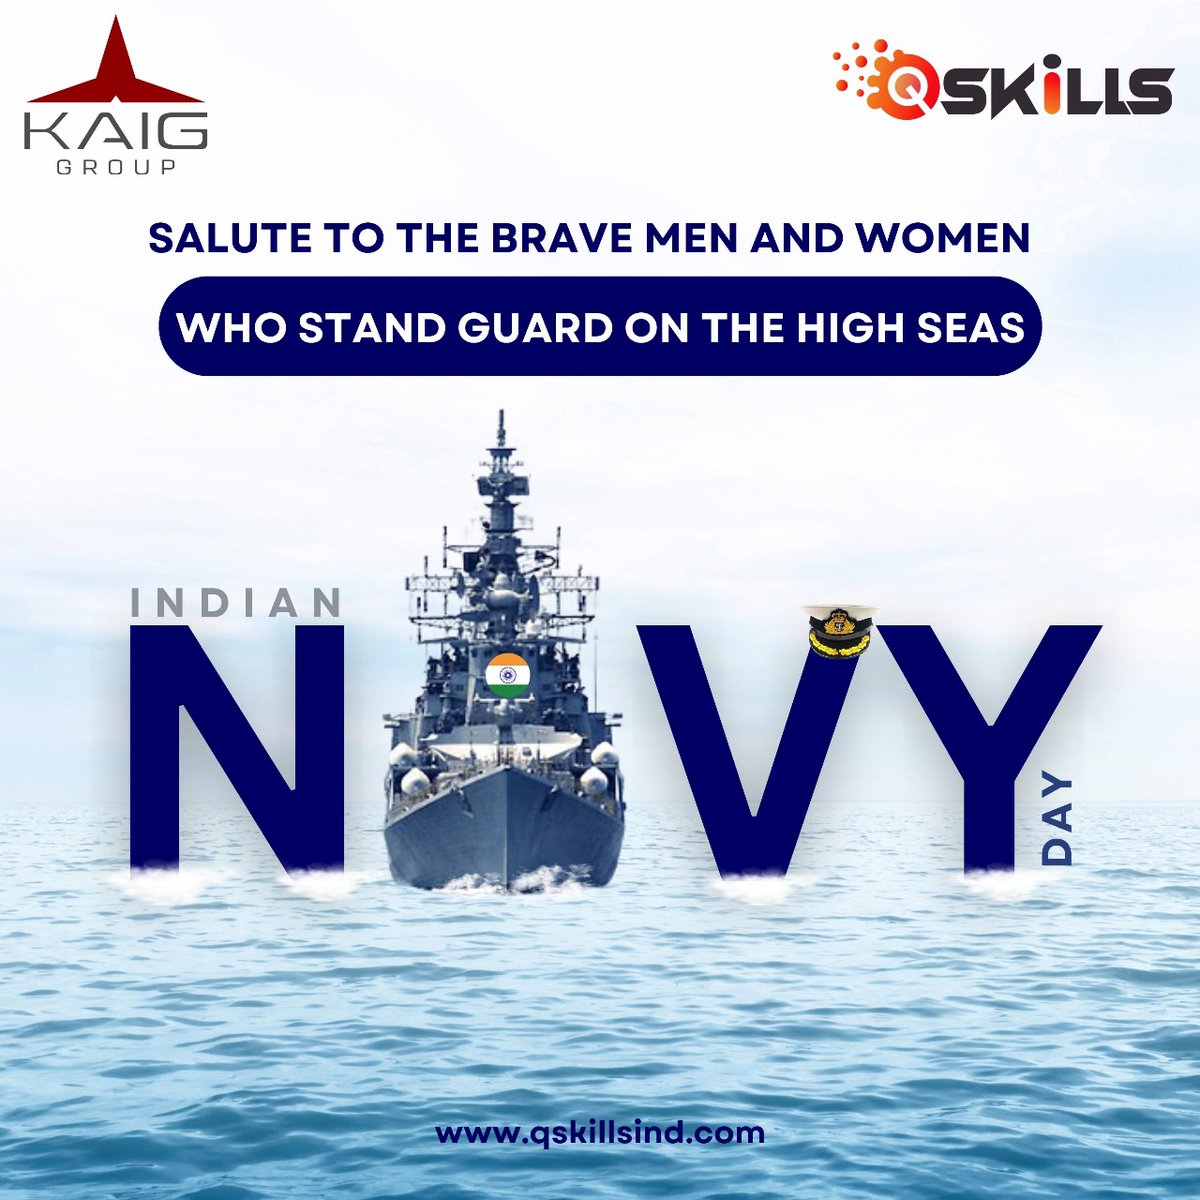 'As the nation celebrates Indian Navy Day, let's salute the fearless guardians protecting our maritime frontiers. At Qskills, we honor their selfless service and unwavering dedication. #kaiggroup #qskills #education #essentialskills #childdevelopment #educationalforall #student